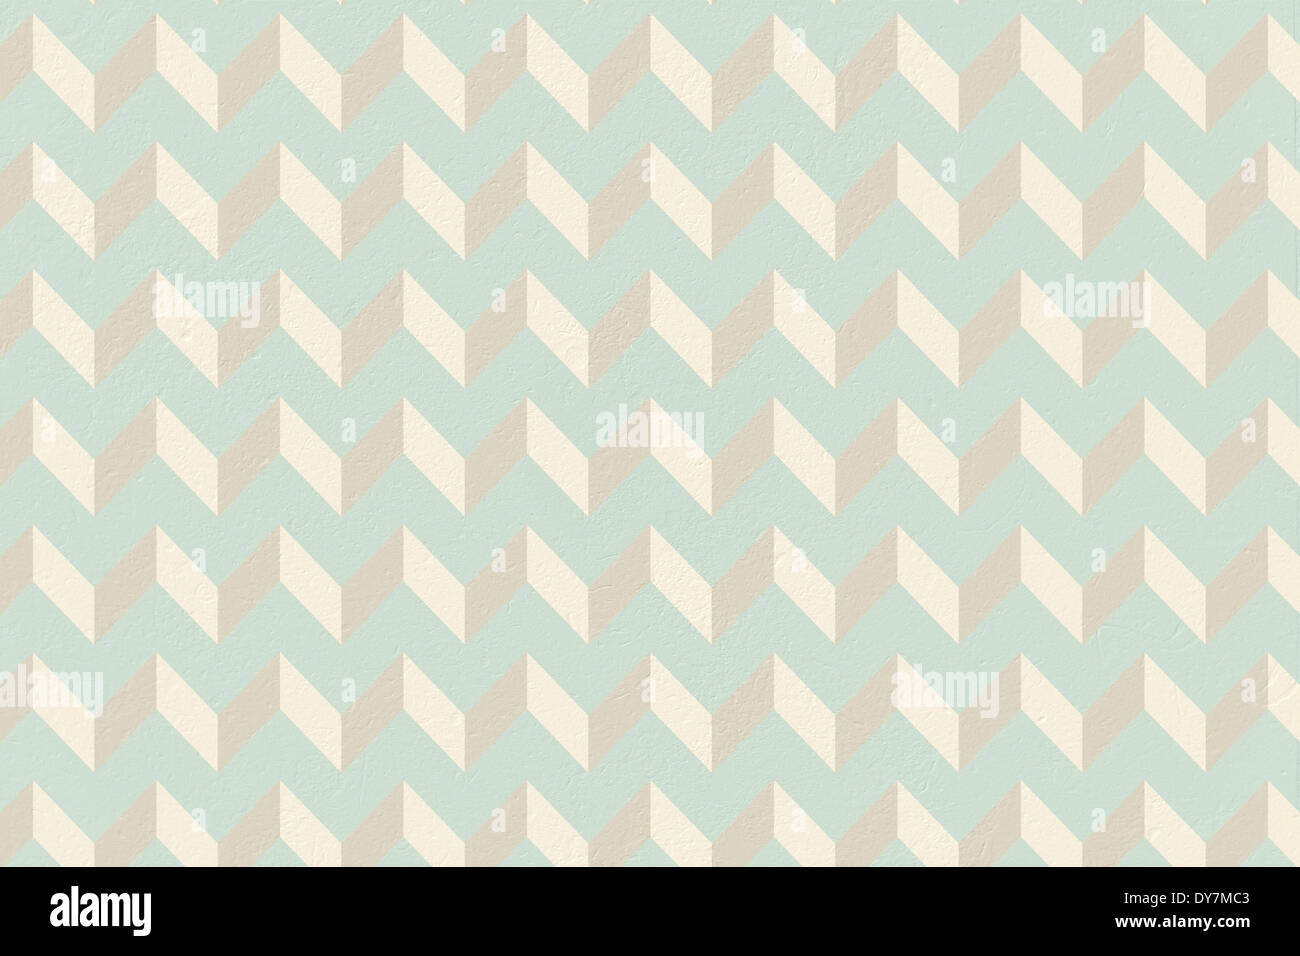 Blue and cream patterned wallpaper Stock Photo